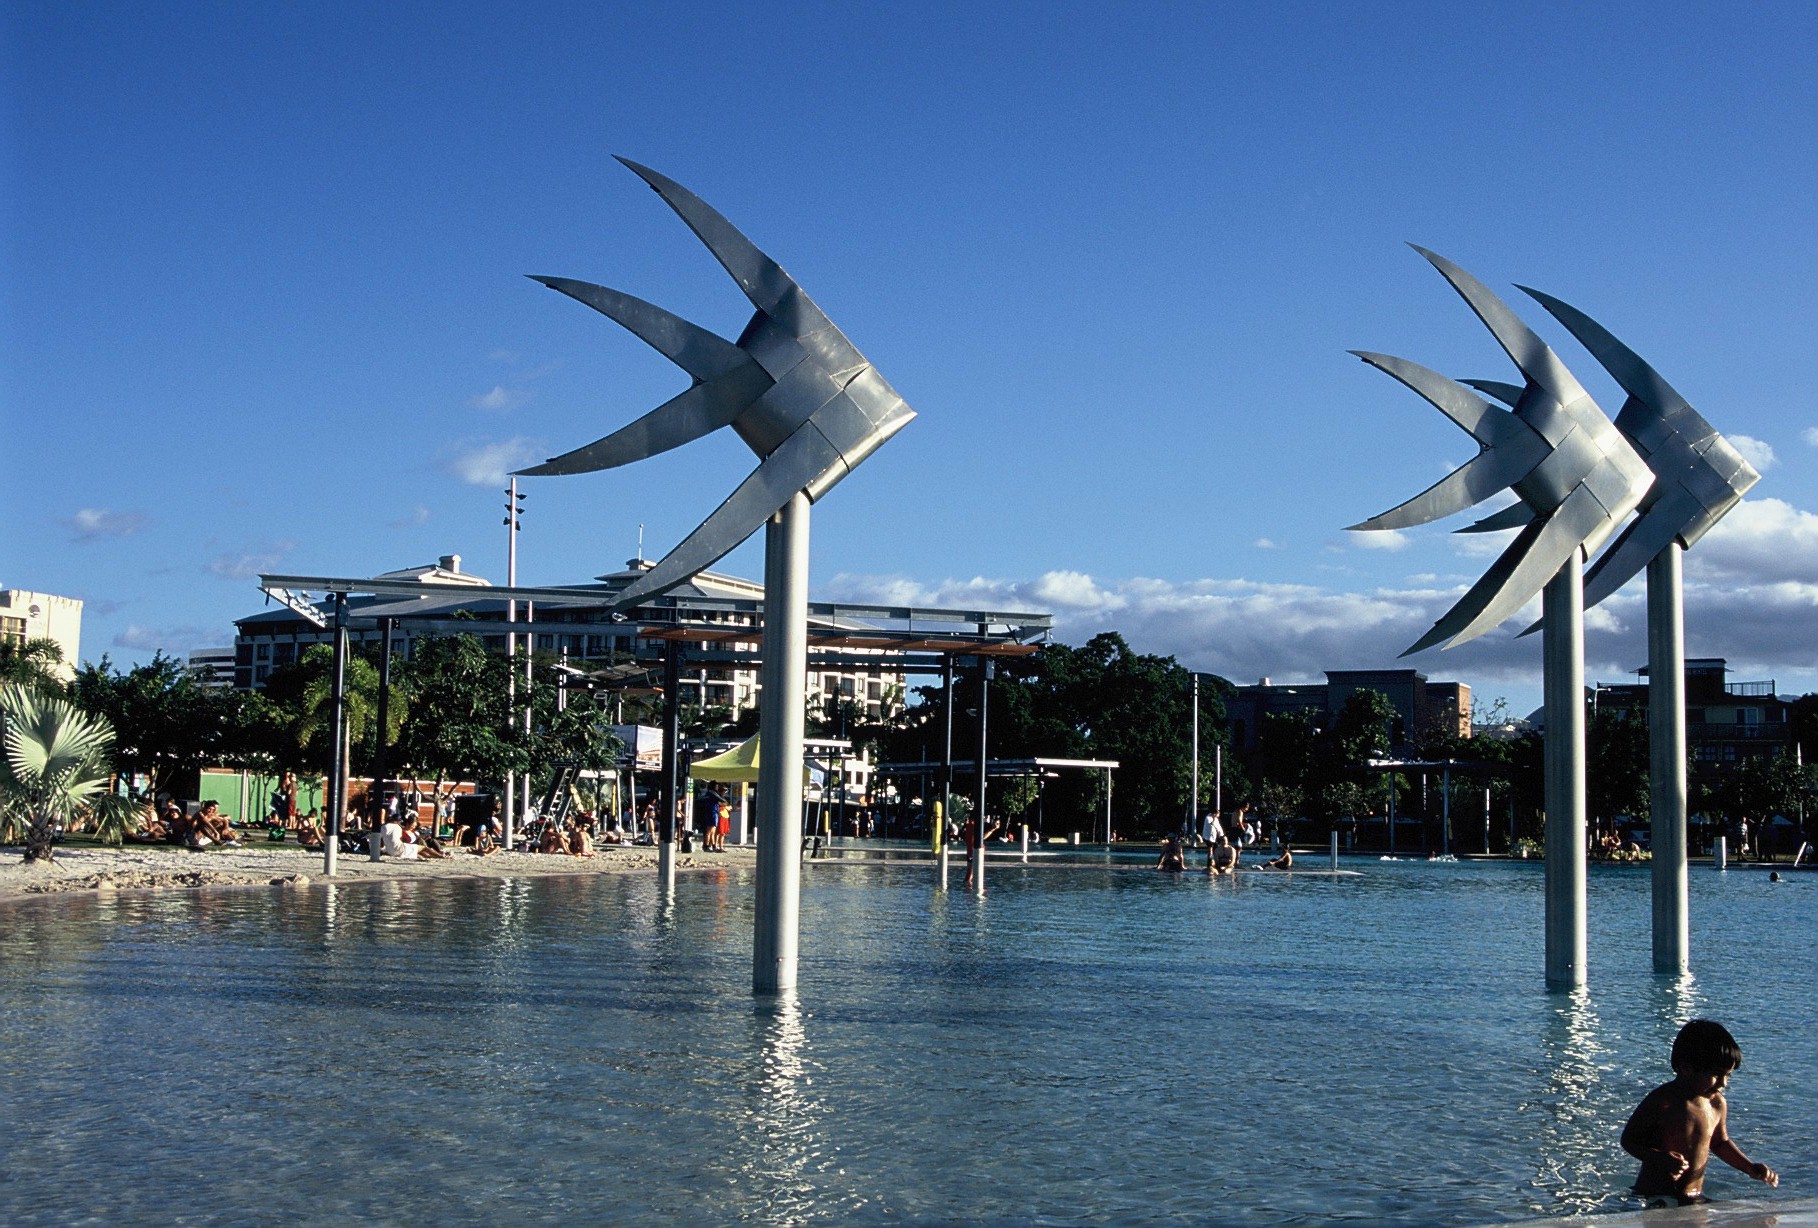 8 Best Things To Do in Cairns, Australia [with Suggested Tours]